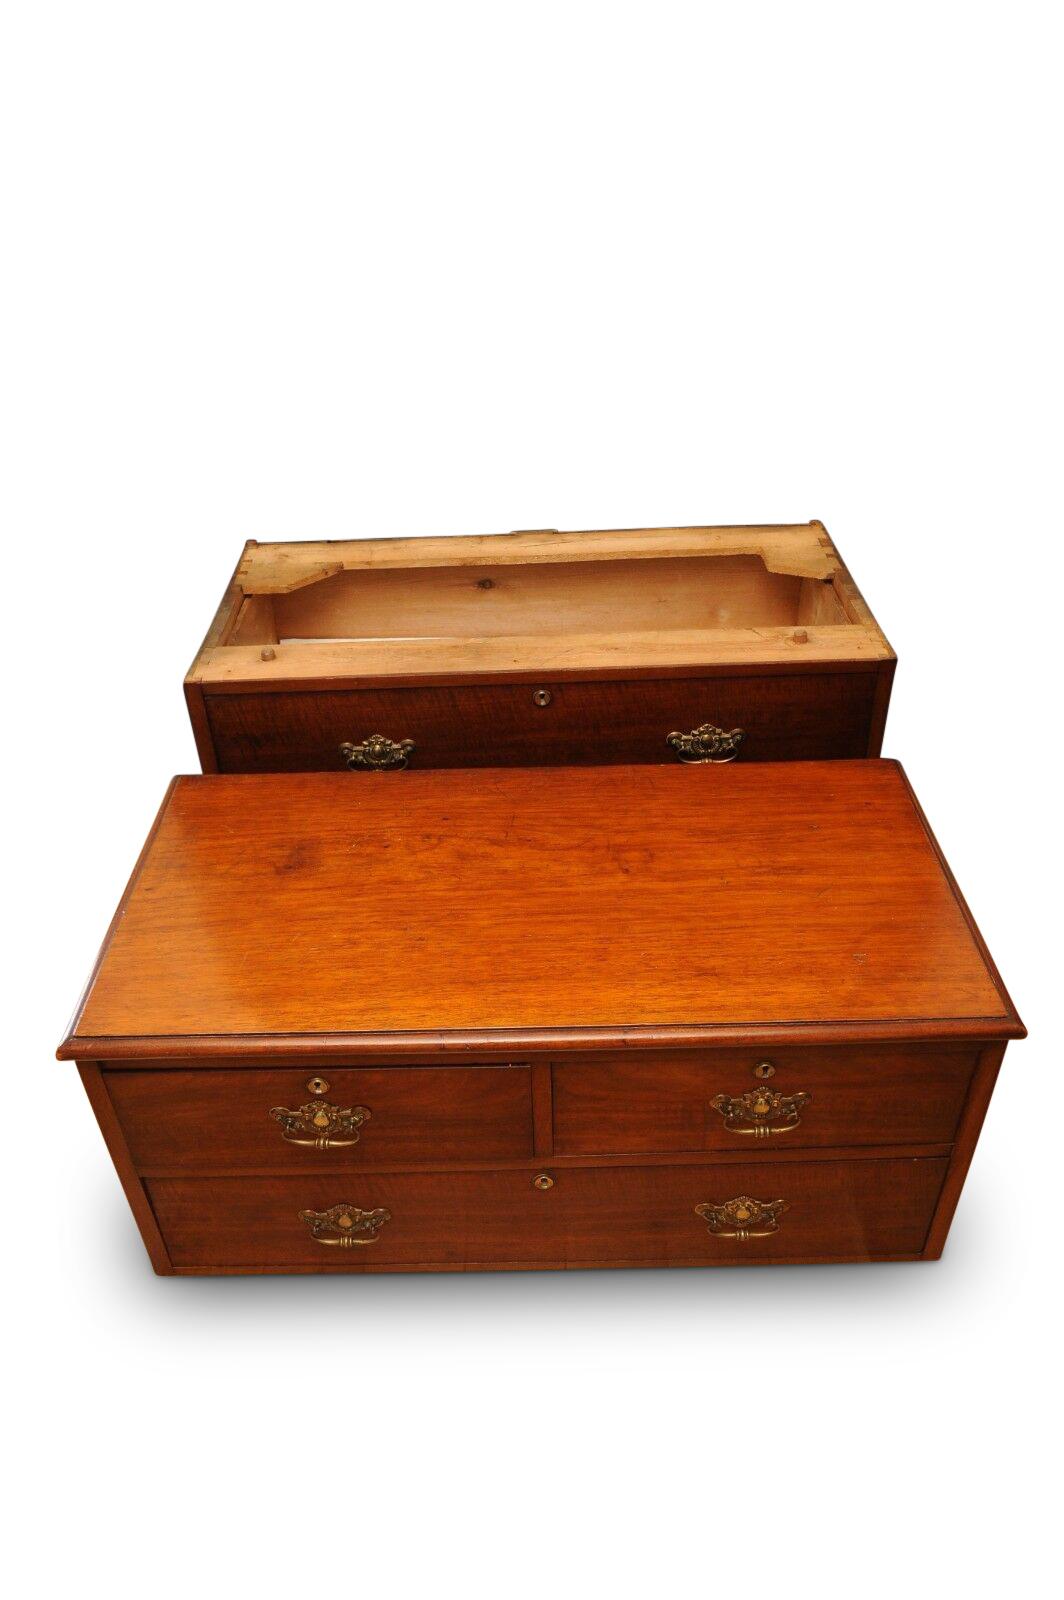 Georgian 1730s military Campaign teak chest in two sections with original batwing brass handles.